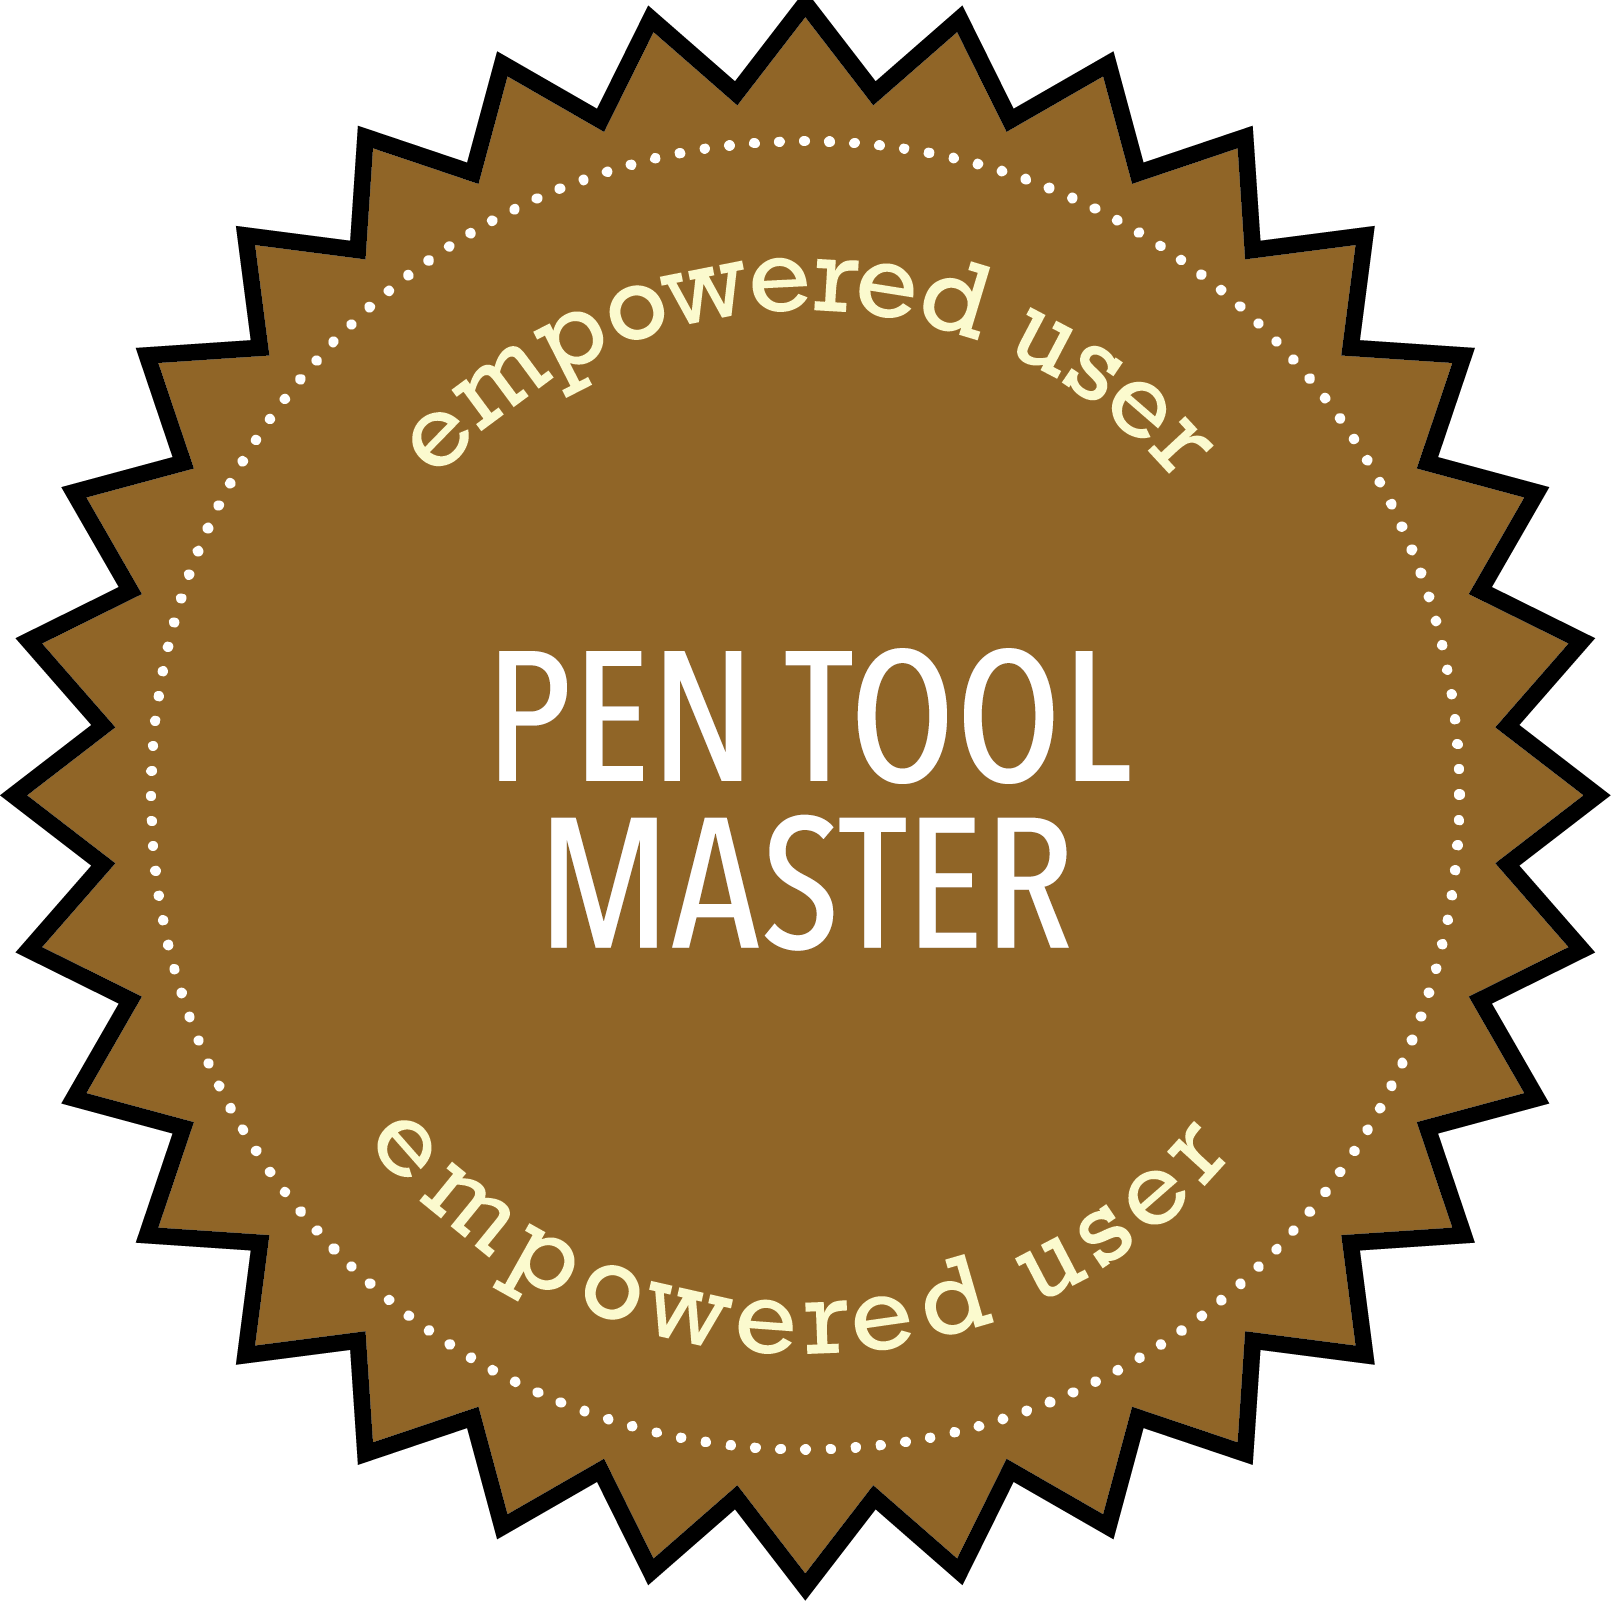 Empowered User: Pen Tool Master